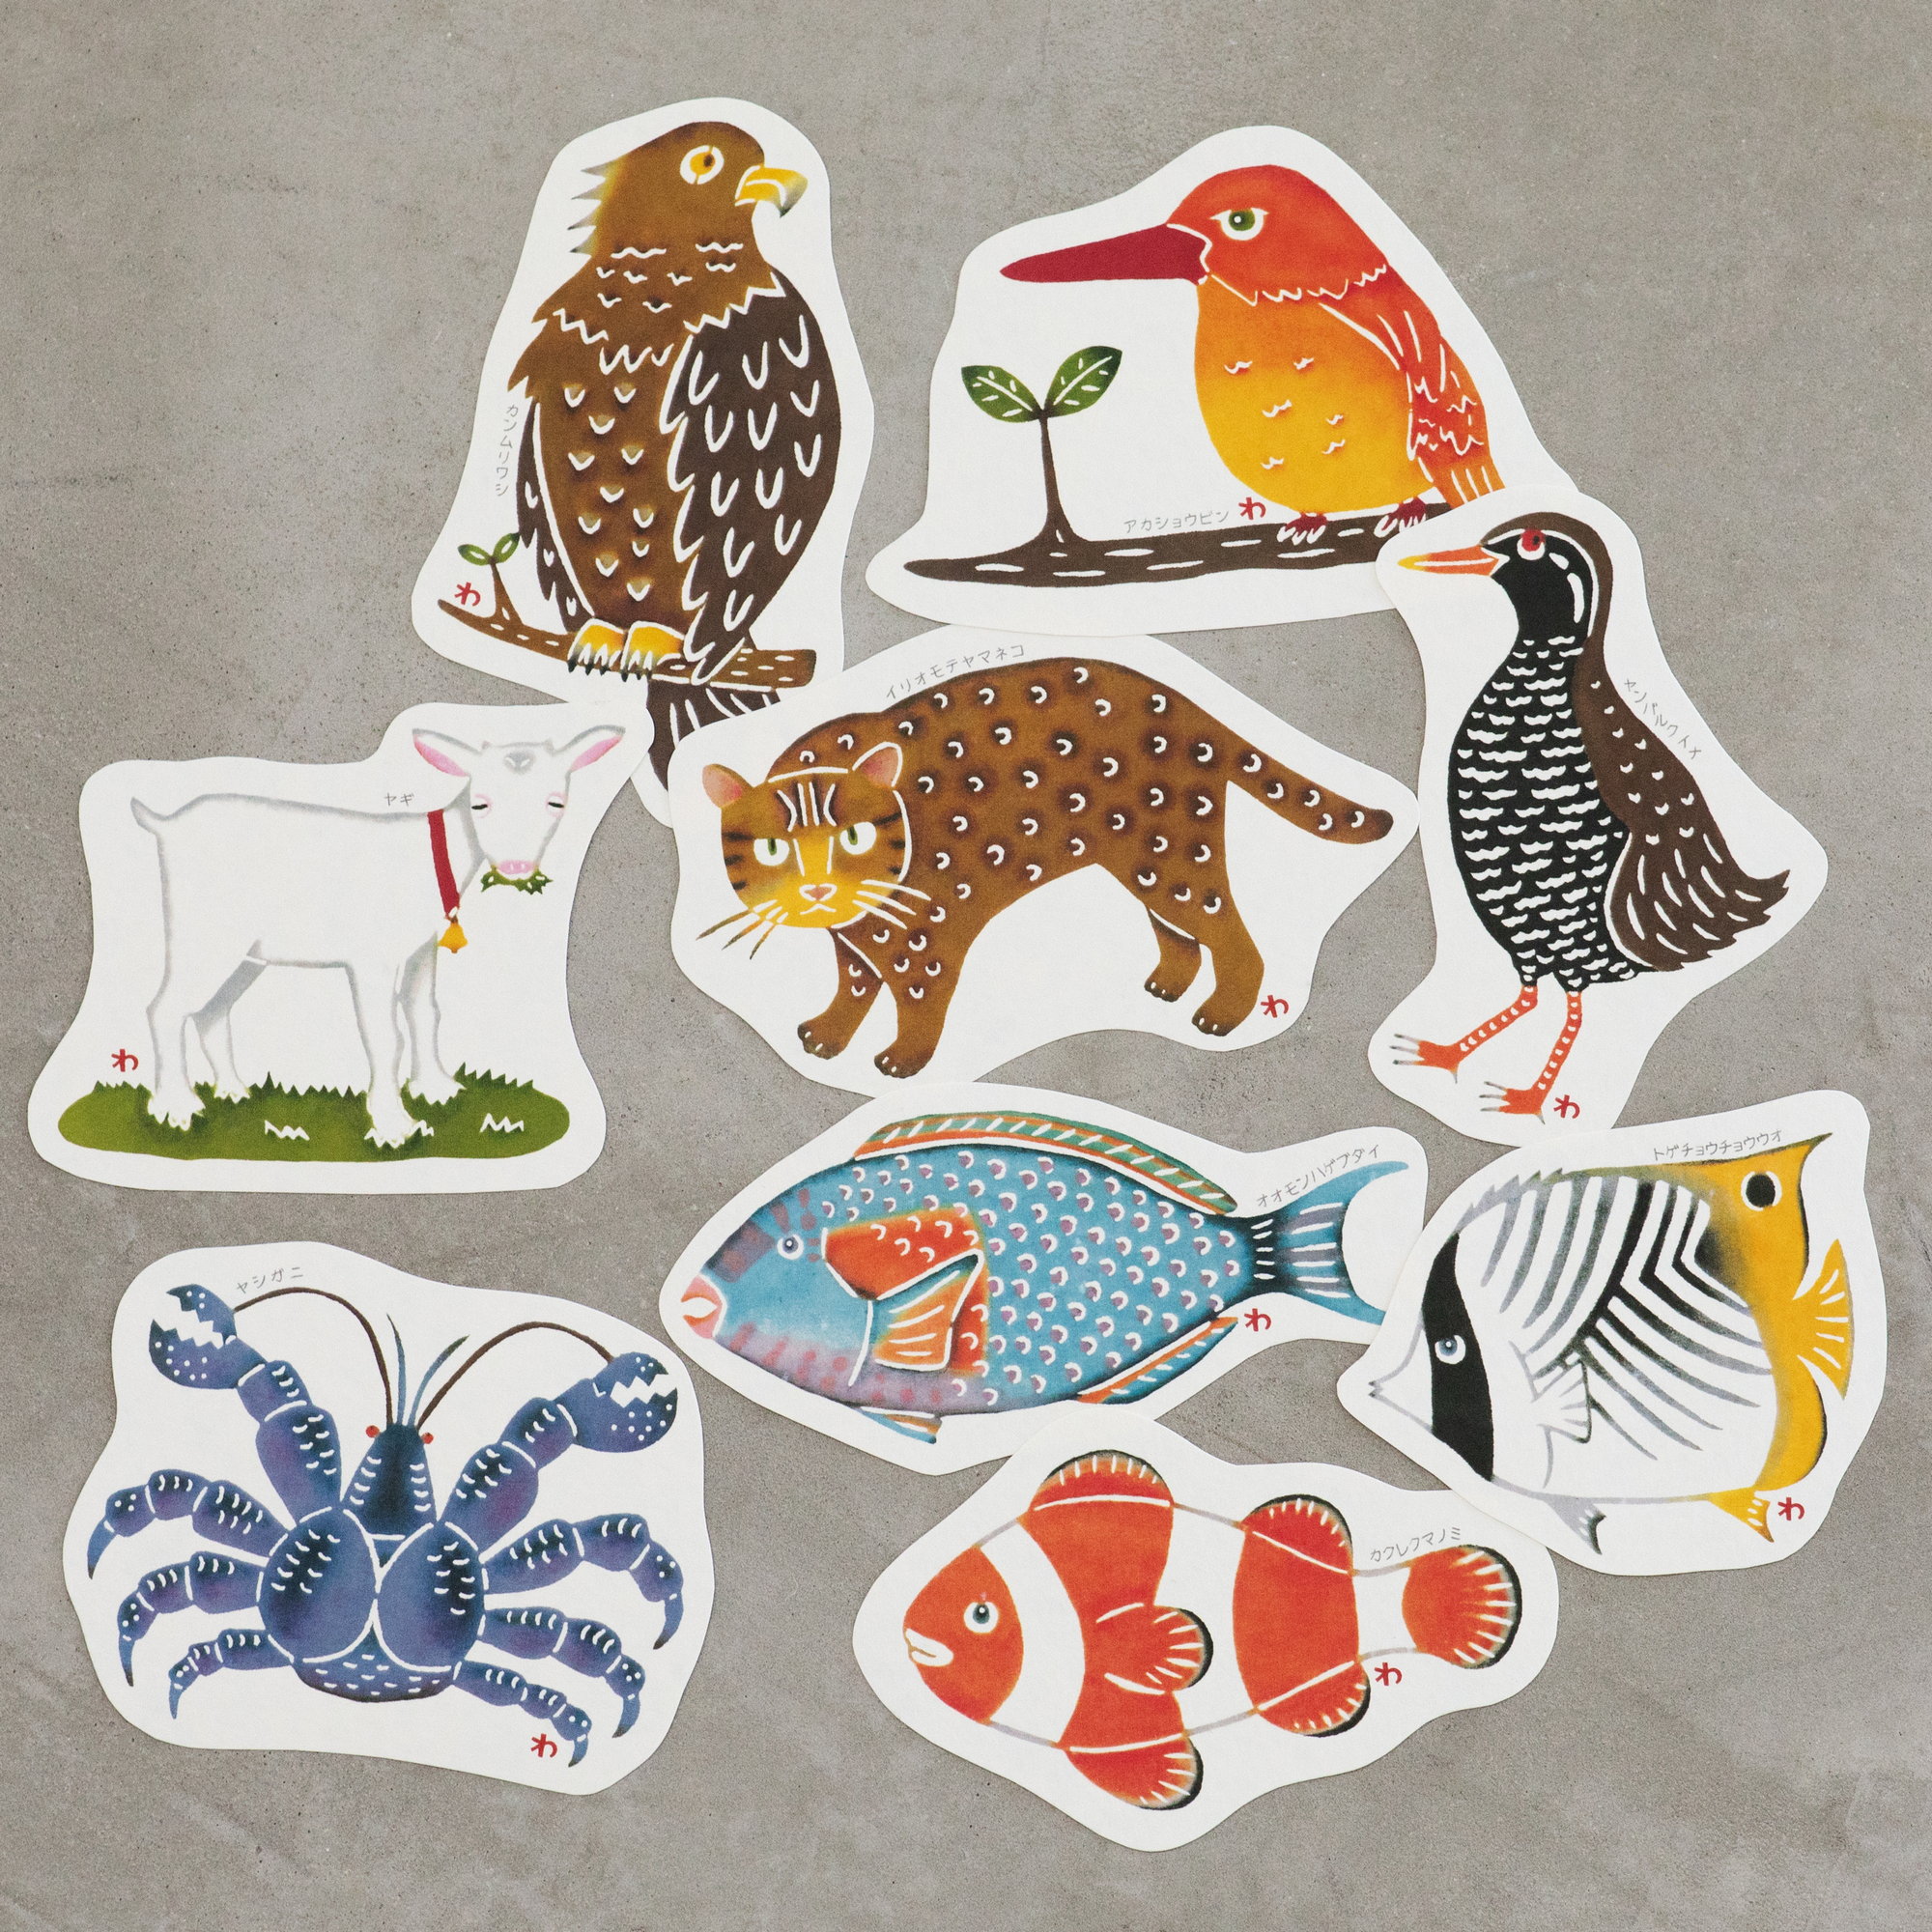 Read more about the article 動物切り抜きカード　Animals Cutout Cards